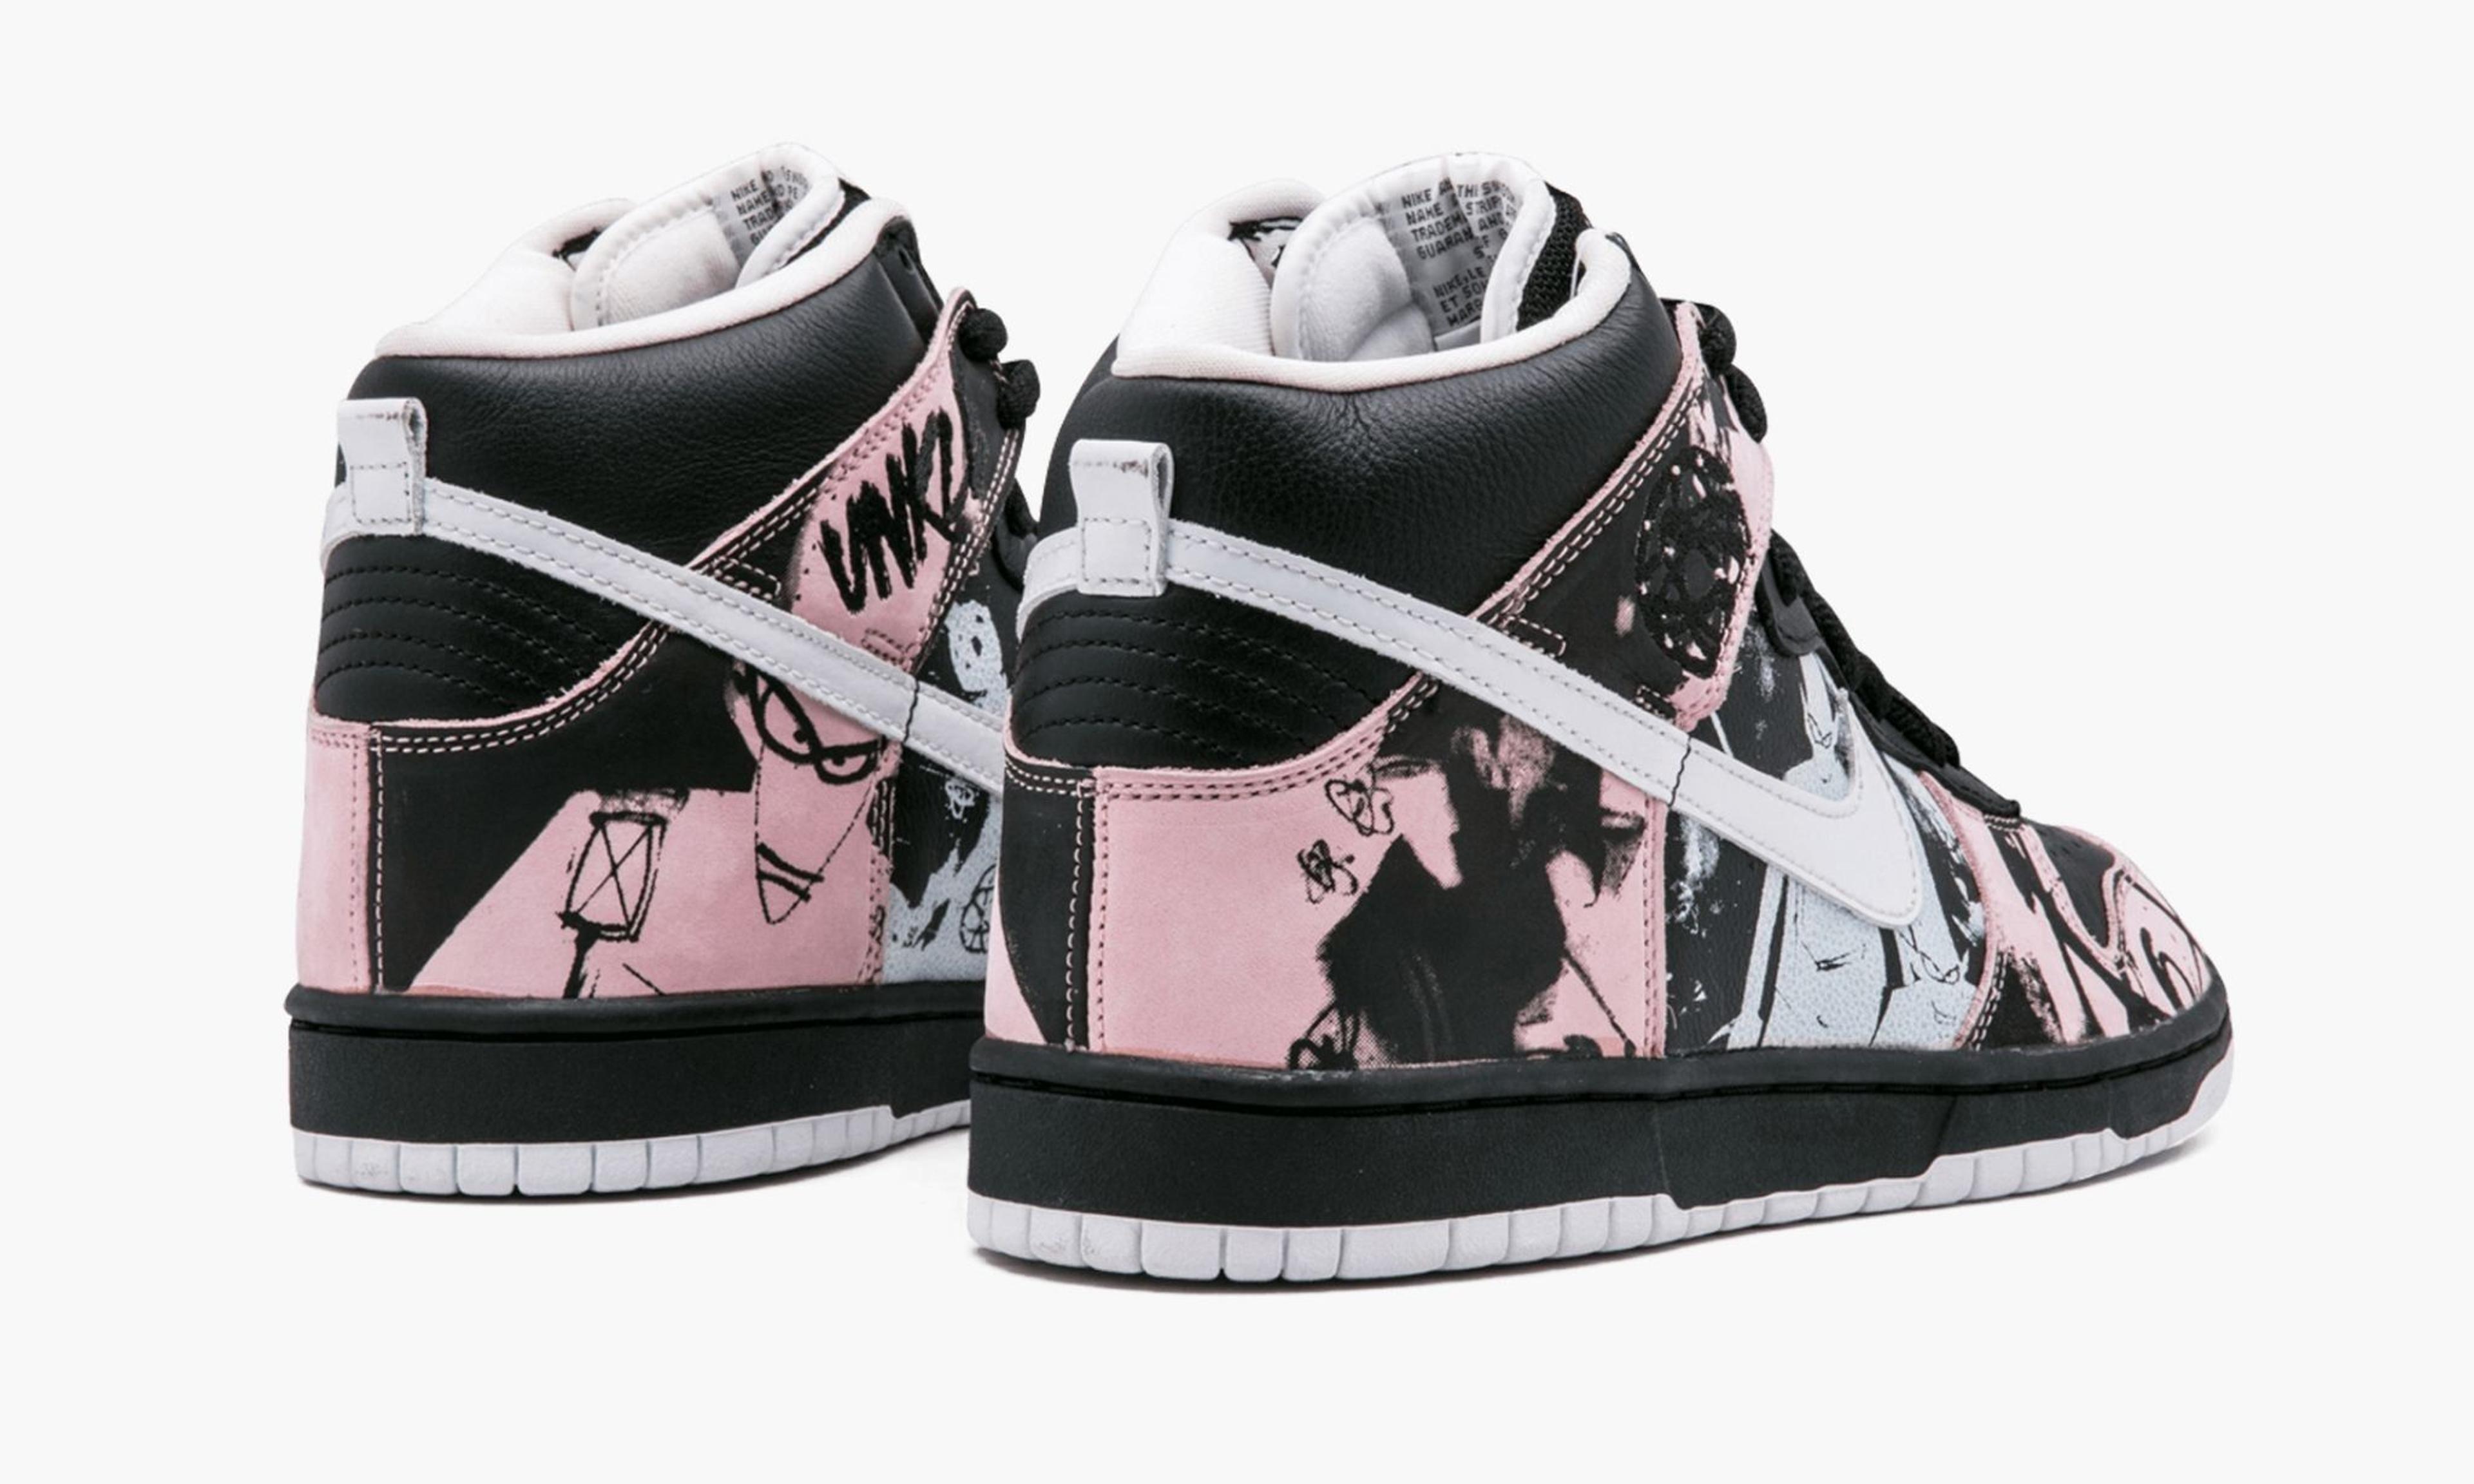 Alternate View 1 of Nike Dunk High Pro SB Unkle